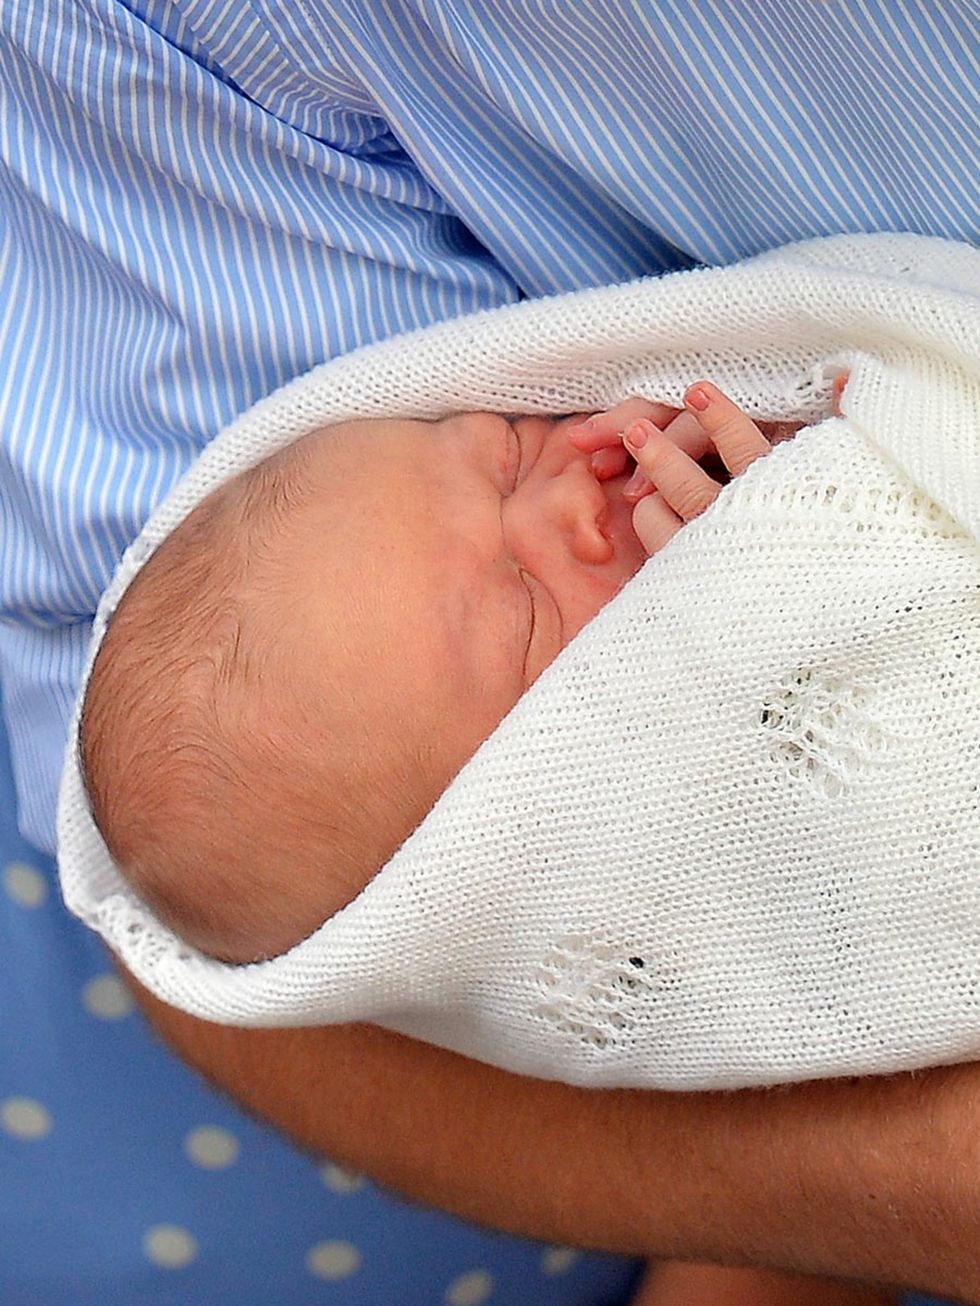 The Royal Birth in Pictures